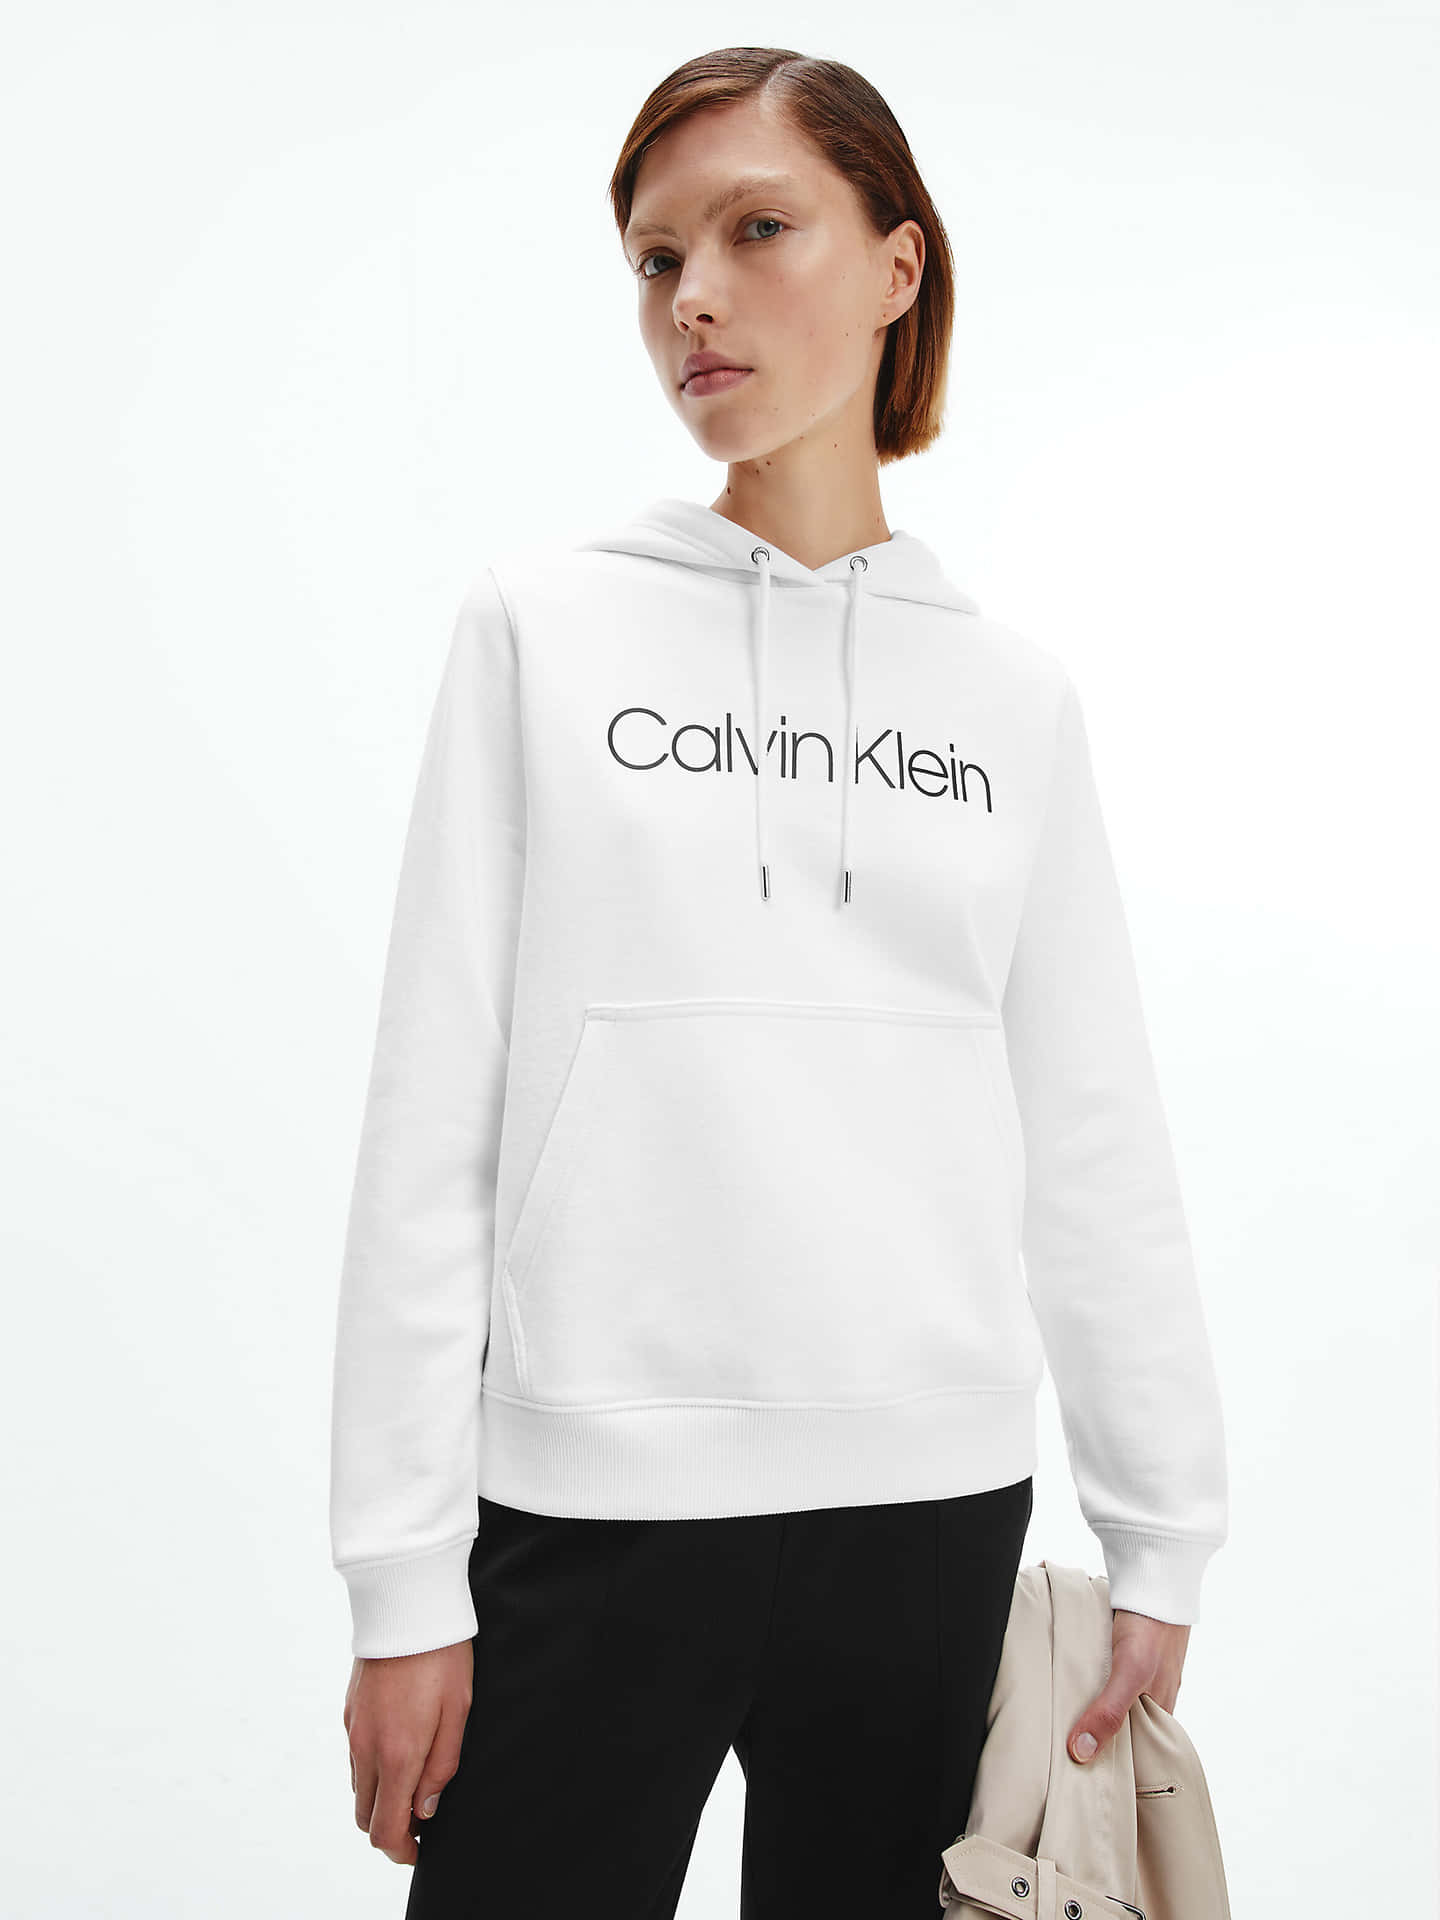 Download Stand Out from the Crowd in New Calvin Klein Fashions ...